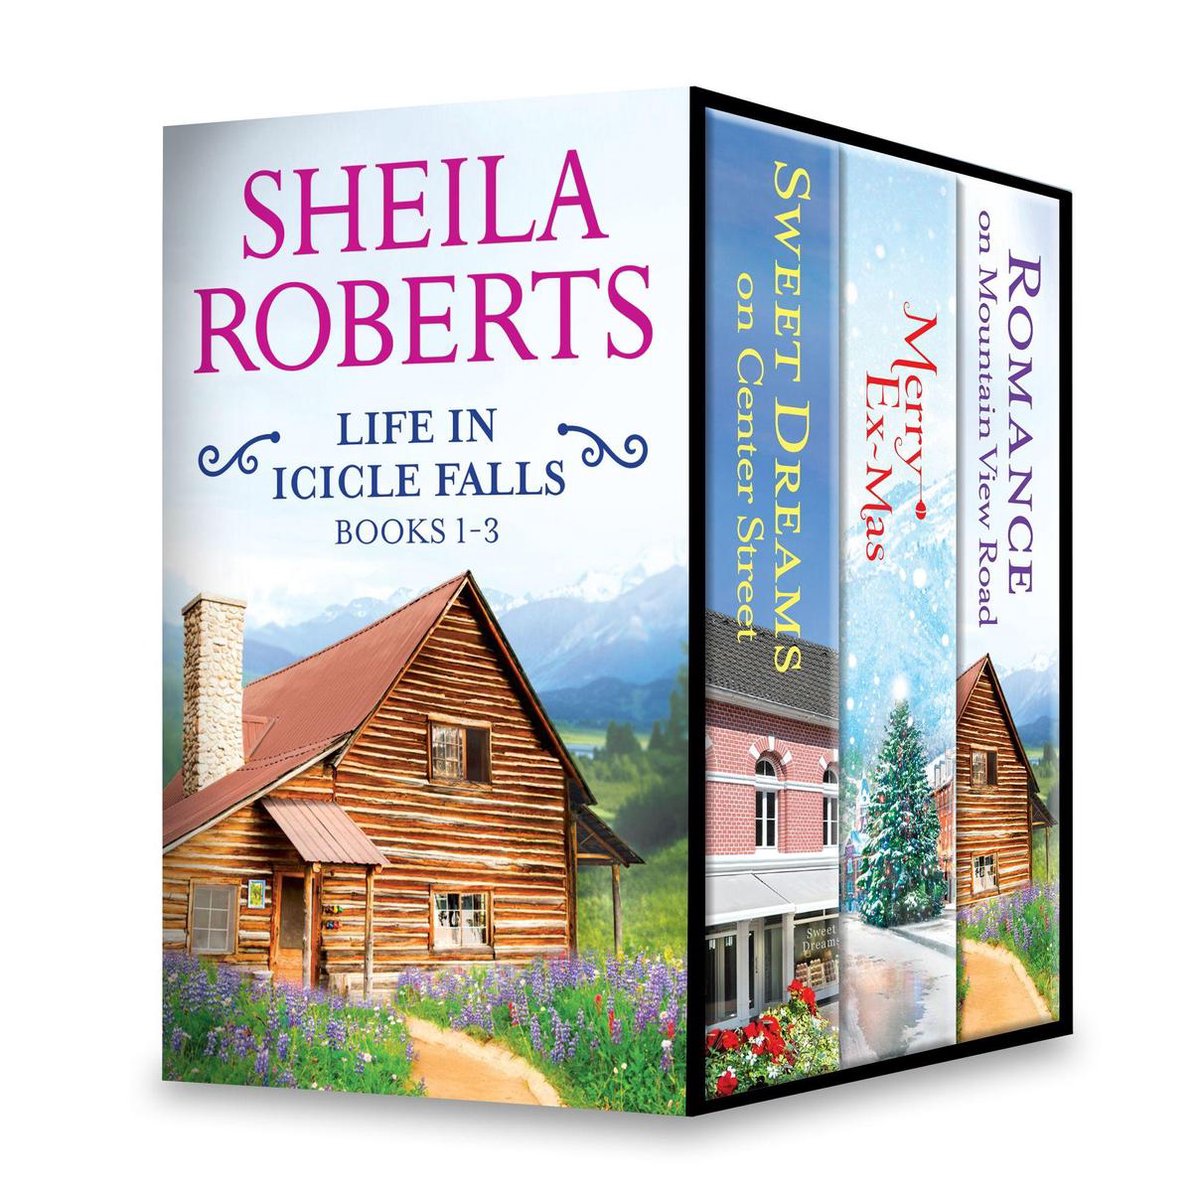 Life in Icicle Falls - Sheila Roberts Life in Icicle Falls Series Books 1-3 - Sheila Roberts